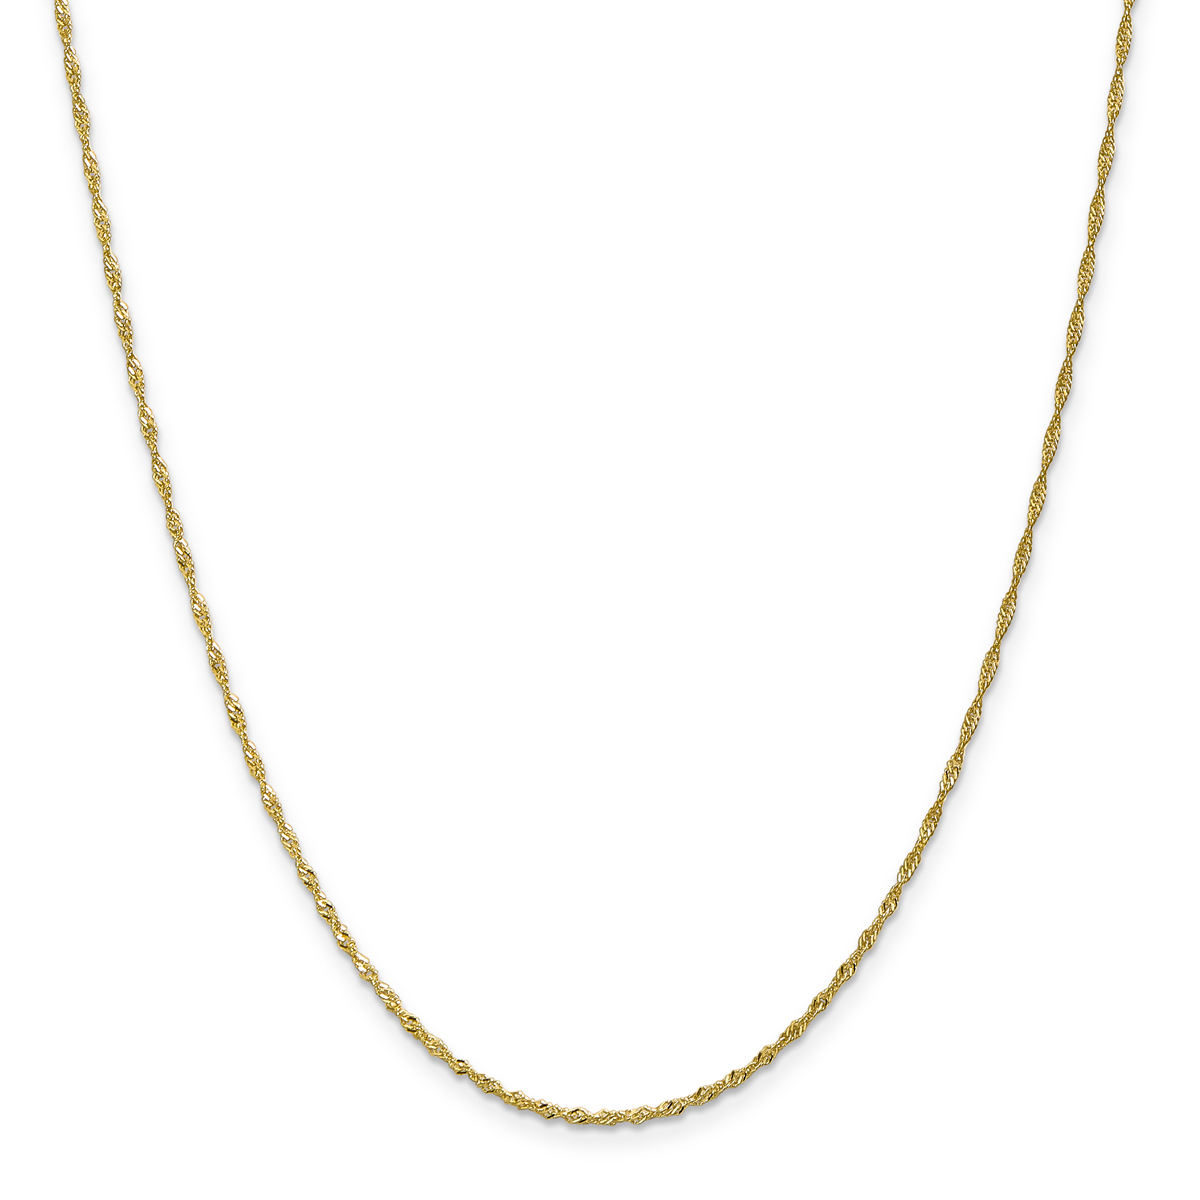 Adult Unisex Gold Classics(tm) 10kt. 20in. Singapore Chain Necklace